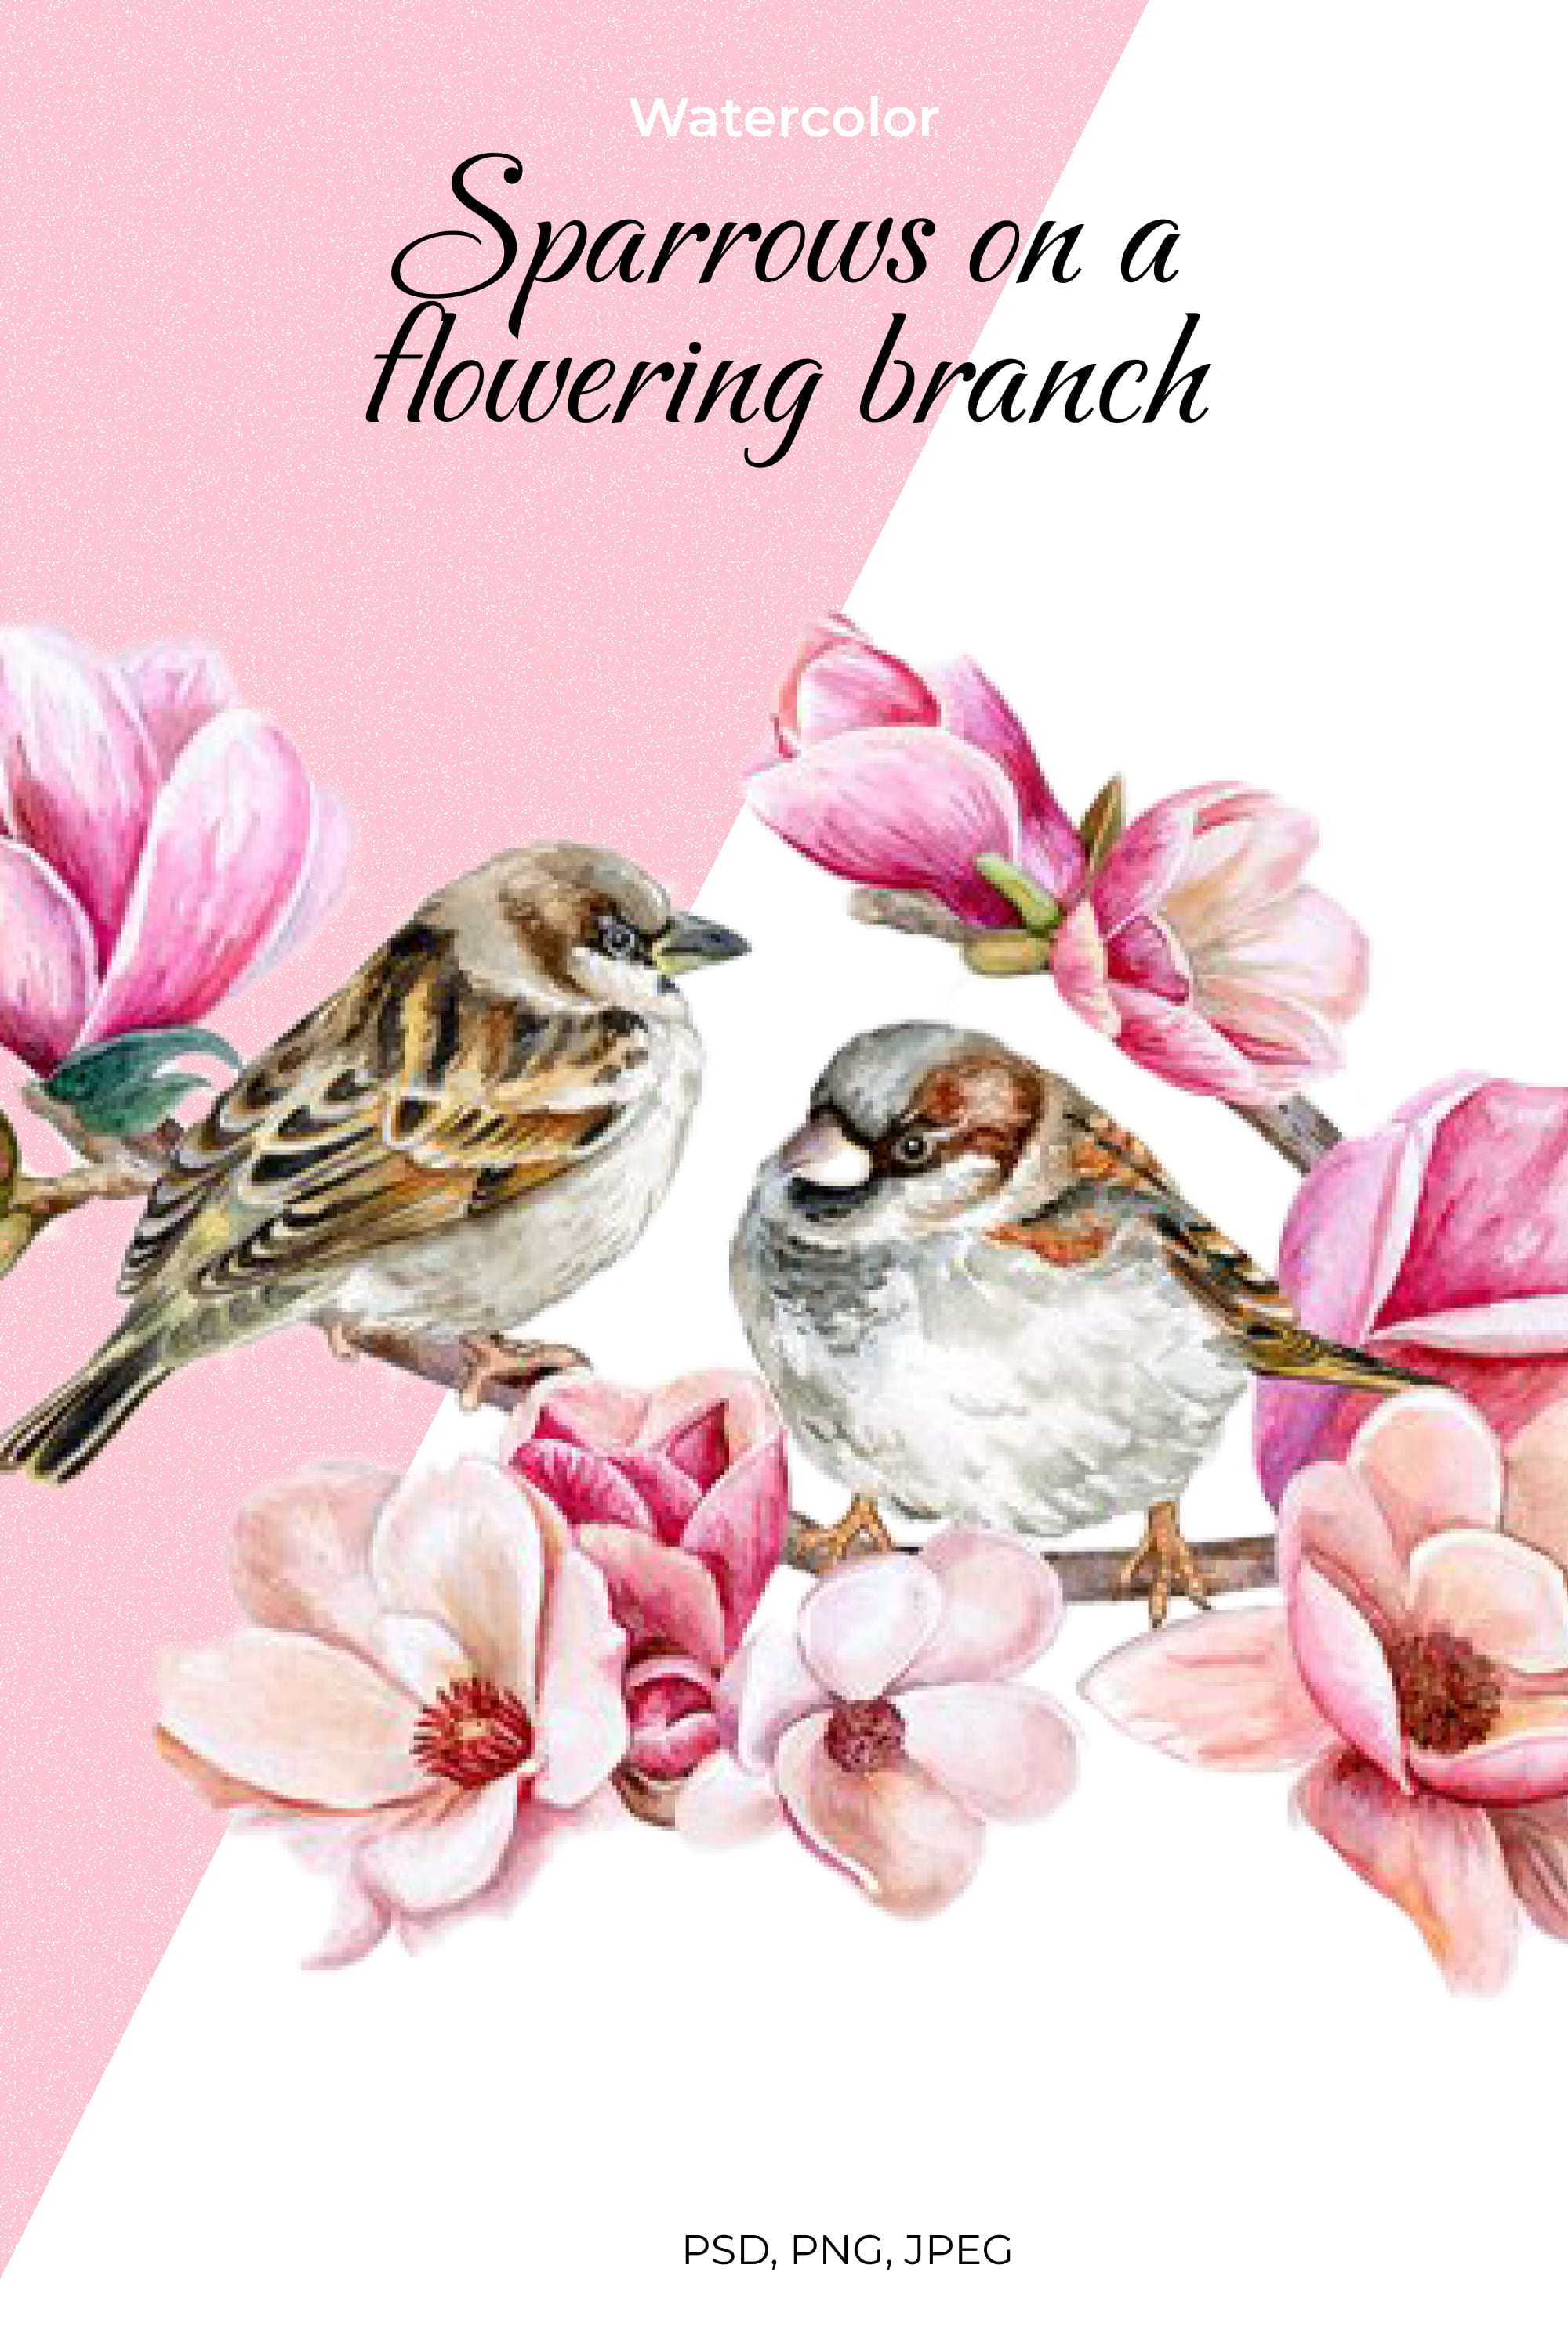 Sparrows on a flowering branch - pinterest image preview.